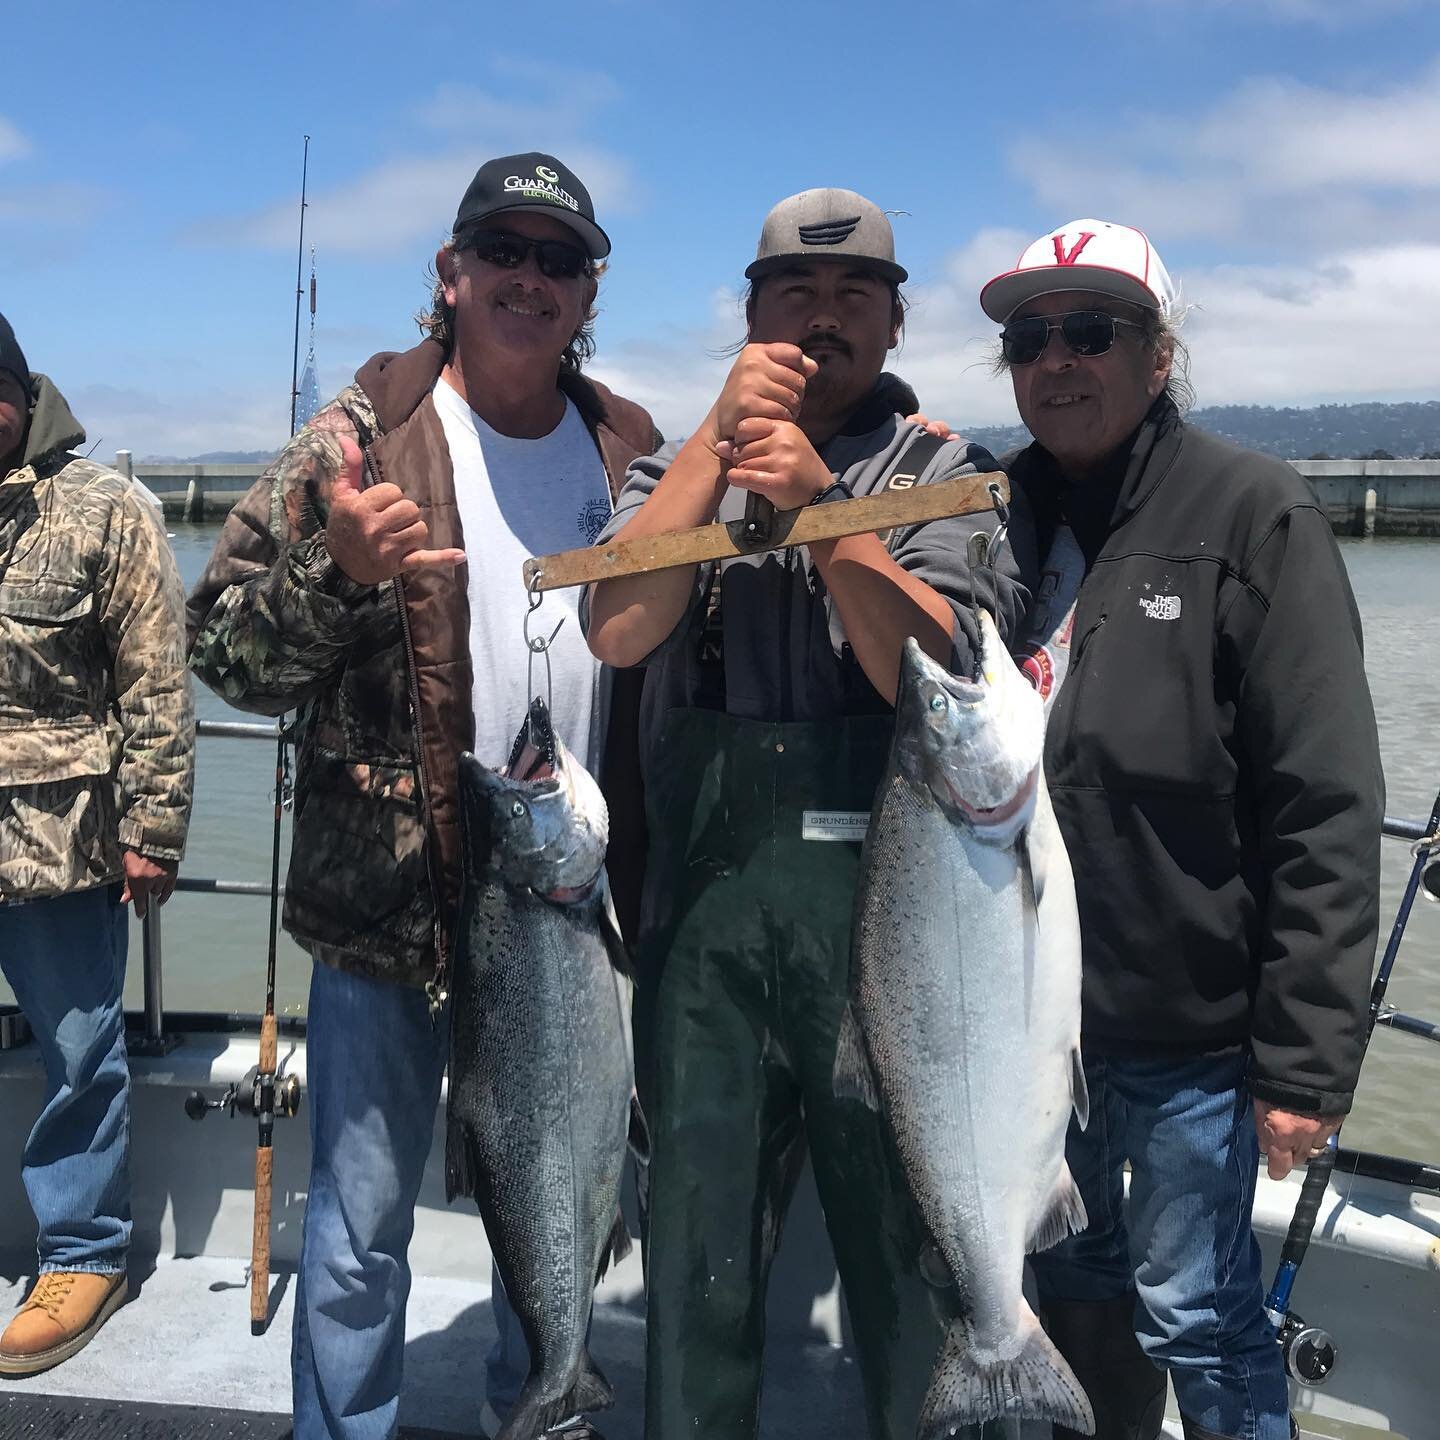 Well we didn&rsquo;t get them before noon today.. 12:01! I can take a shower now! Our 12 guys finished with limits to 25 lbs! Definitely some nicer fish out there now! Book your next trip at fishemeryville.com or visit our website at pacificpearlchar